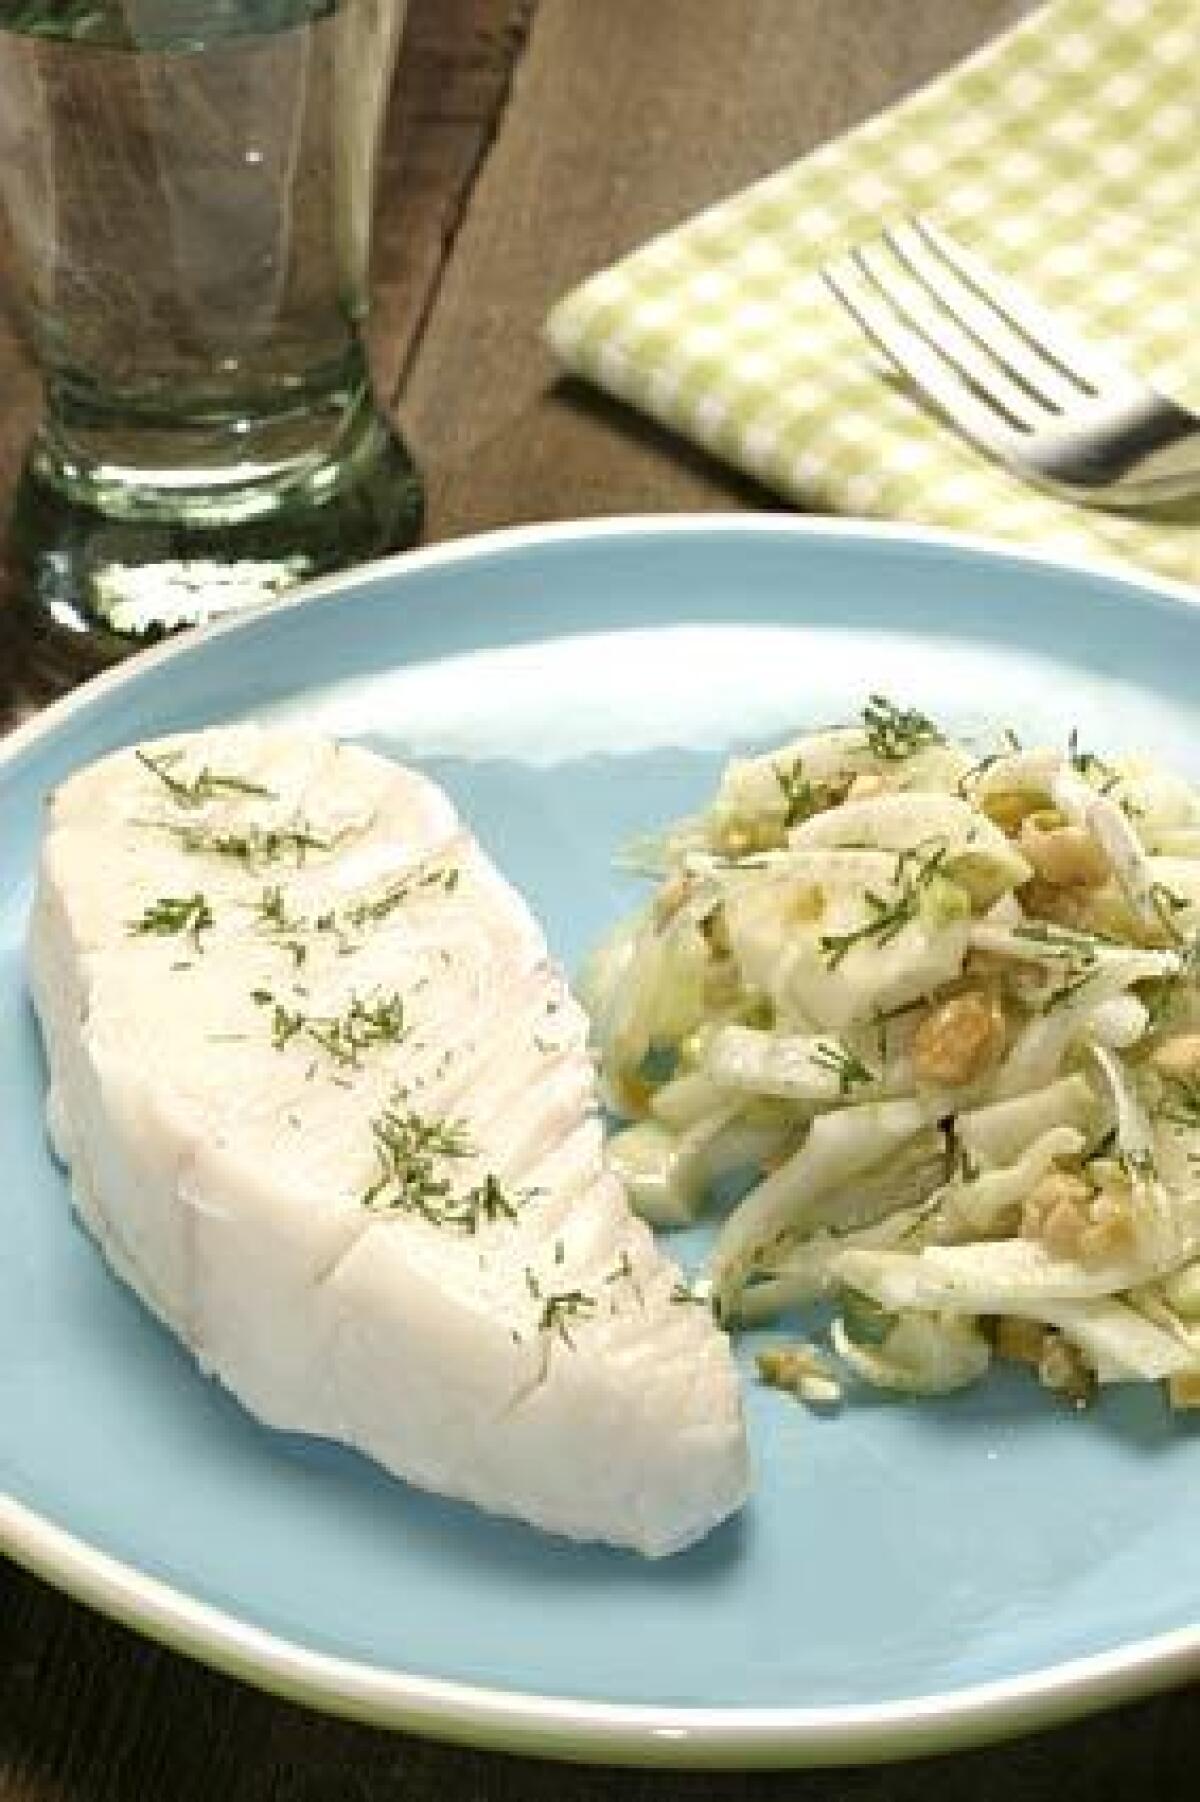 Cold-poached halibut pairs well with the crunch of a fennel, olives and walnut salad, tossed with olive oil and lemon juice.